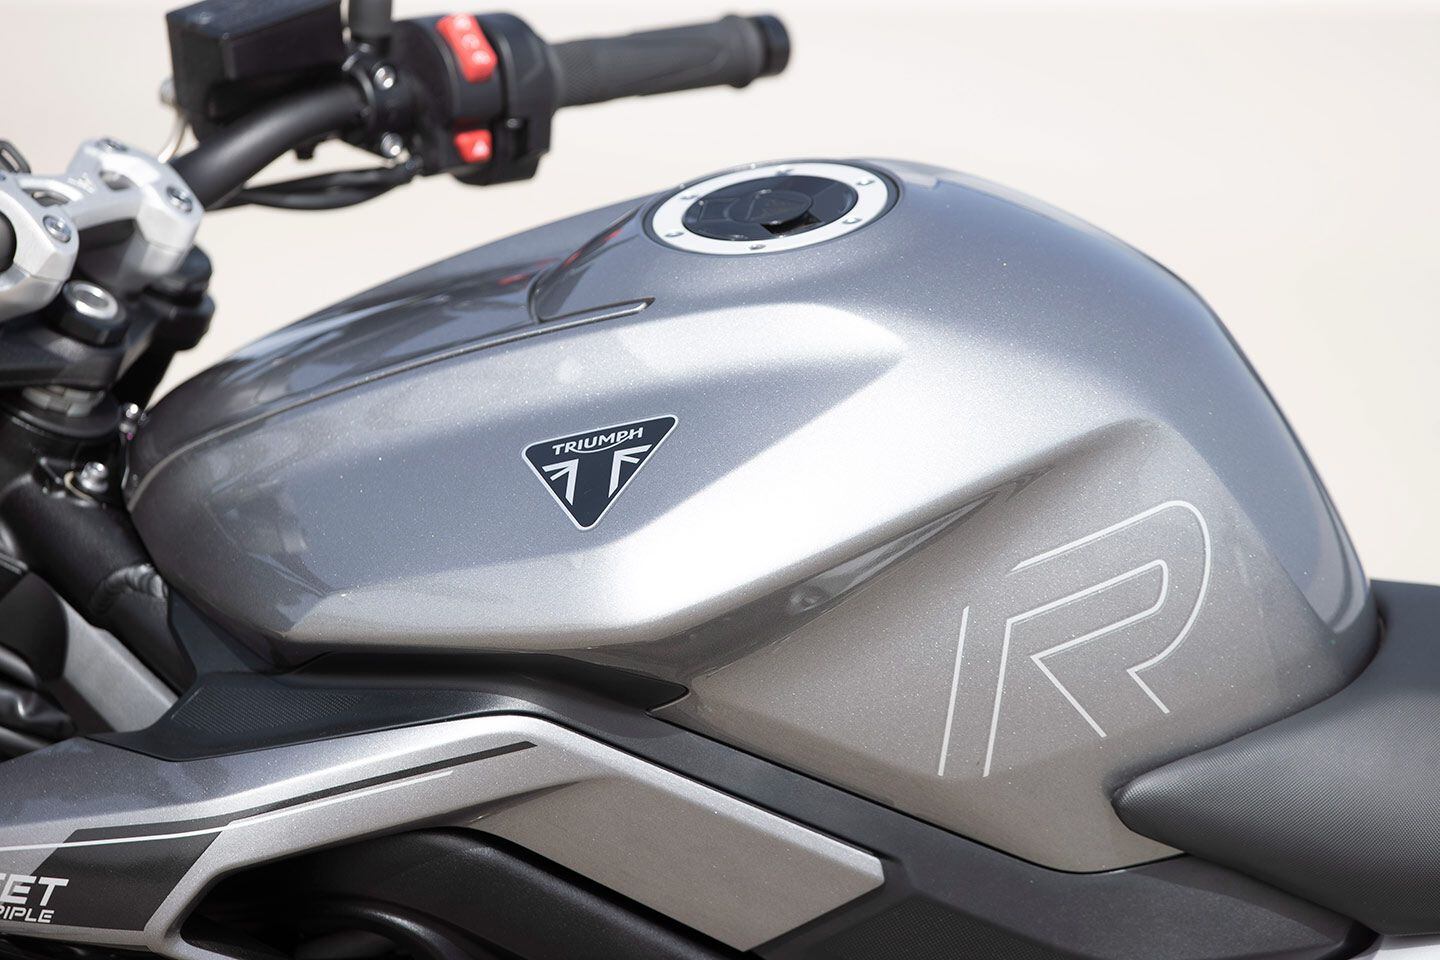 Styling updates give the Street Triple 765 a sharper appearance. Unfortunately, that aggressive appearance comes at the expense of a larger fuel tank. The new tank is just 3.96 gallons.